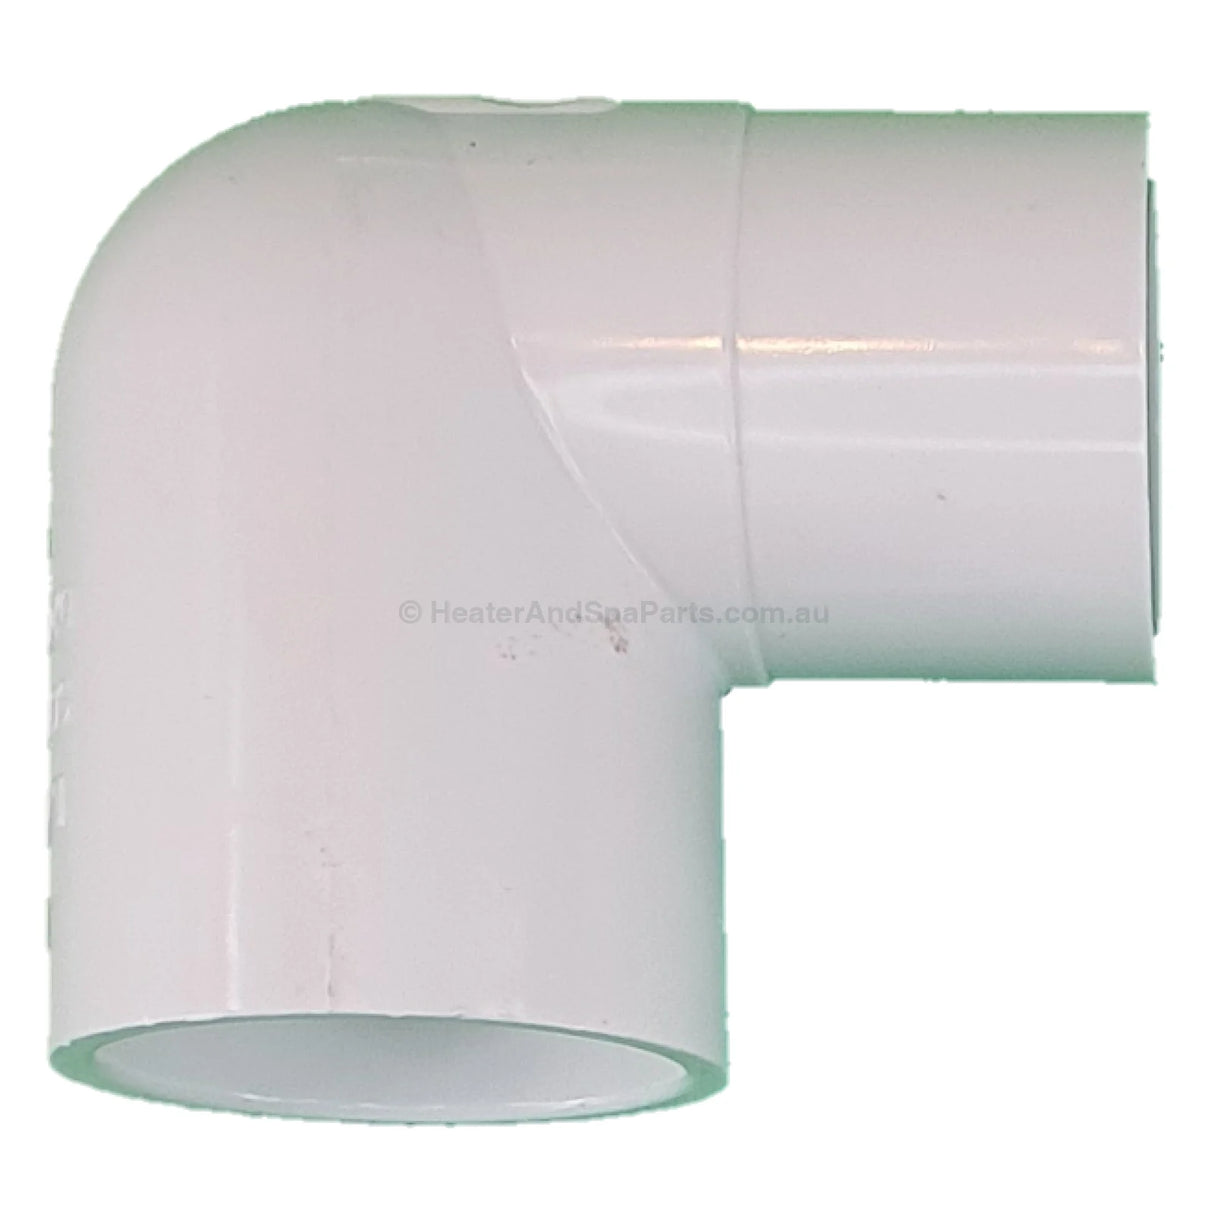 40mm / 1.5" Street Elbow - 90° - Heater and Spa Parts